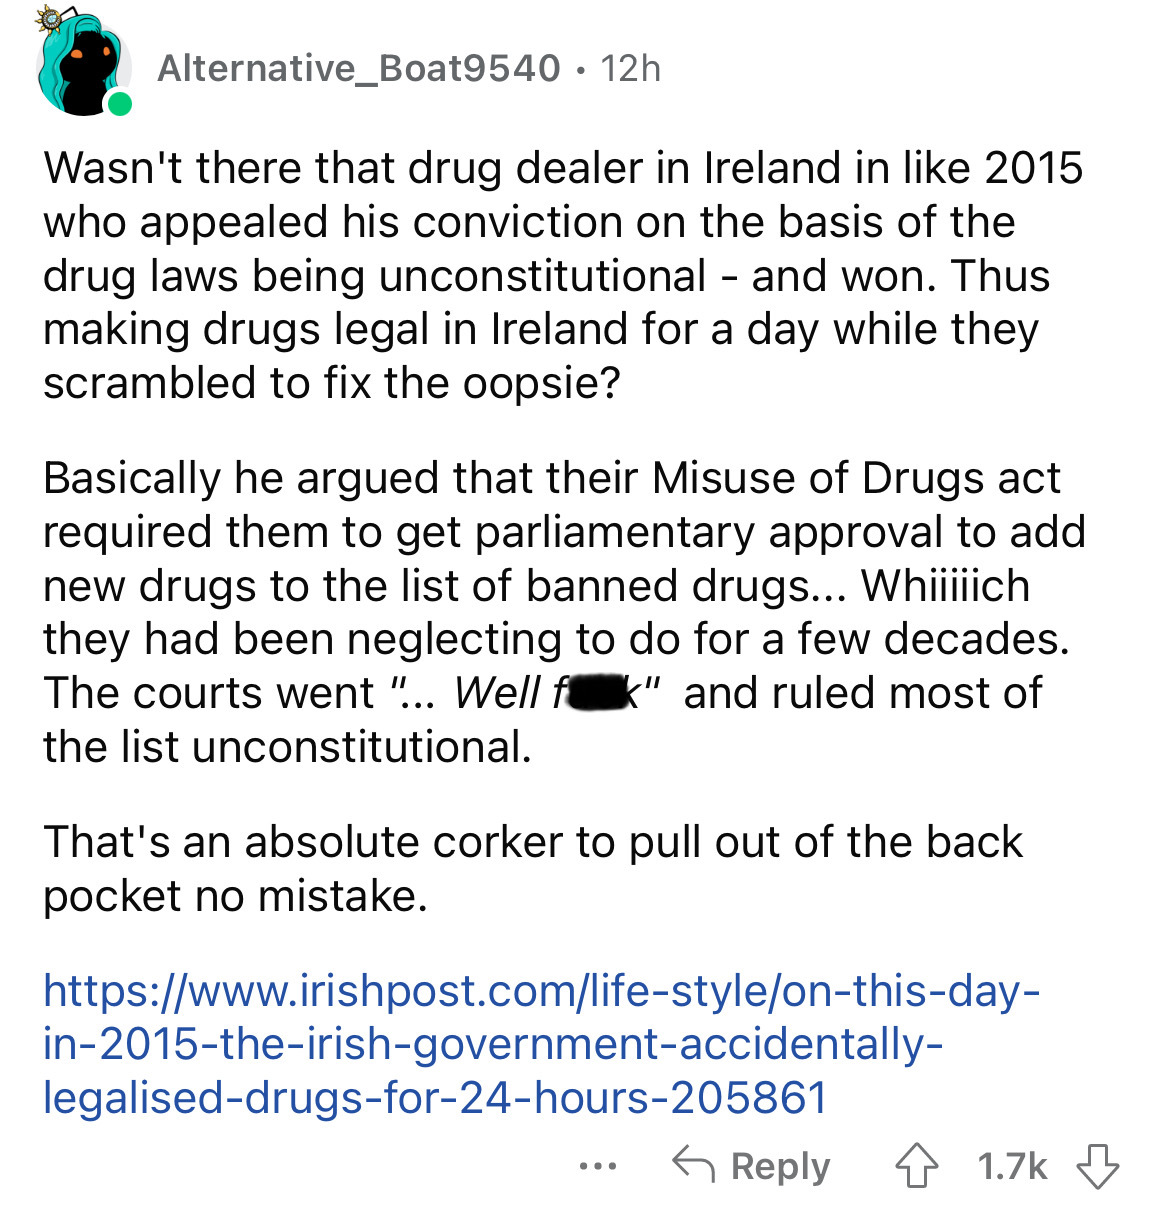 number - Alternative_Boat9540 12h Wasn't there that drug dealer in Ireland in 2015 who appealed his conviction on the basis of the drug laws being unconstitutional and won. Thus making drugs legal in Ireland for a day while they scrambled to fix the oopsi